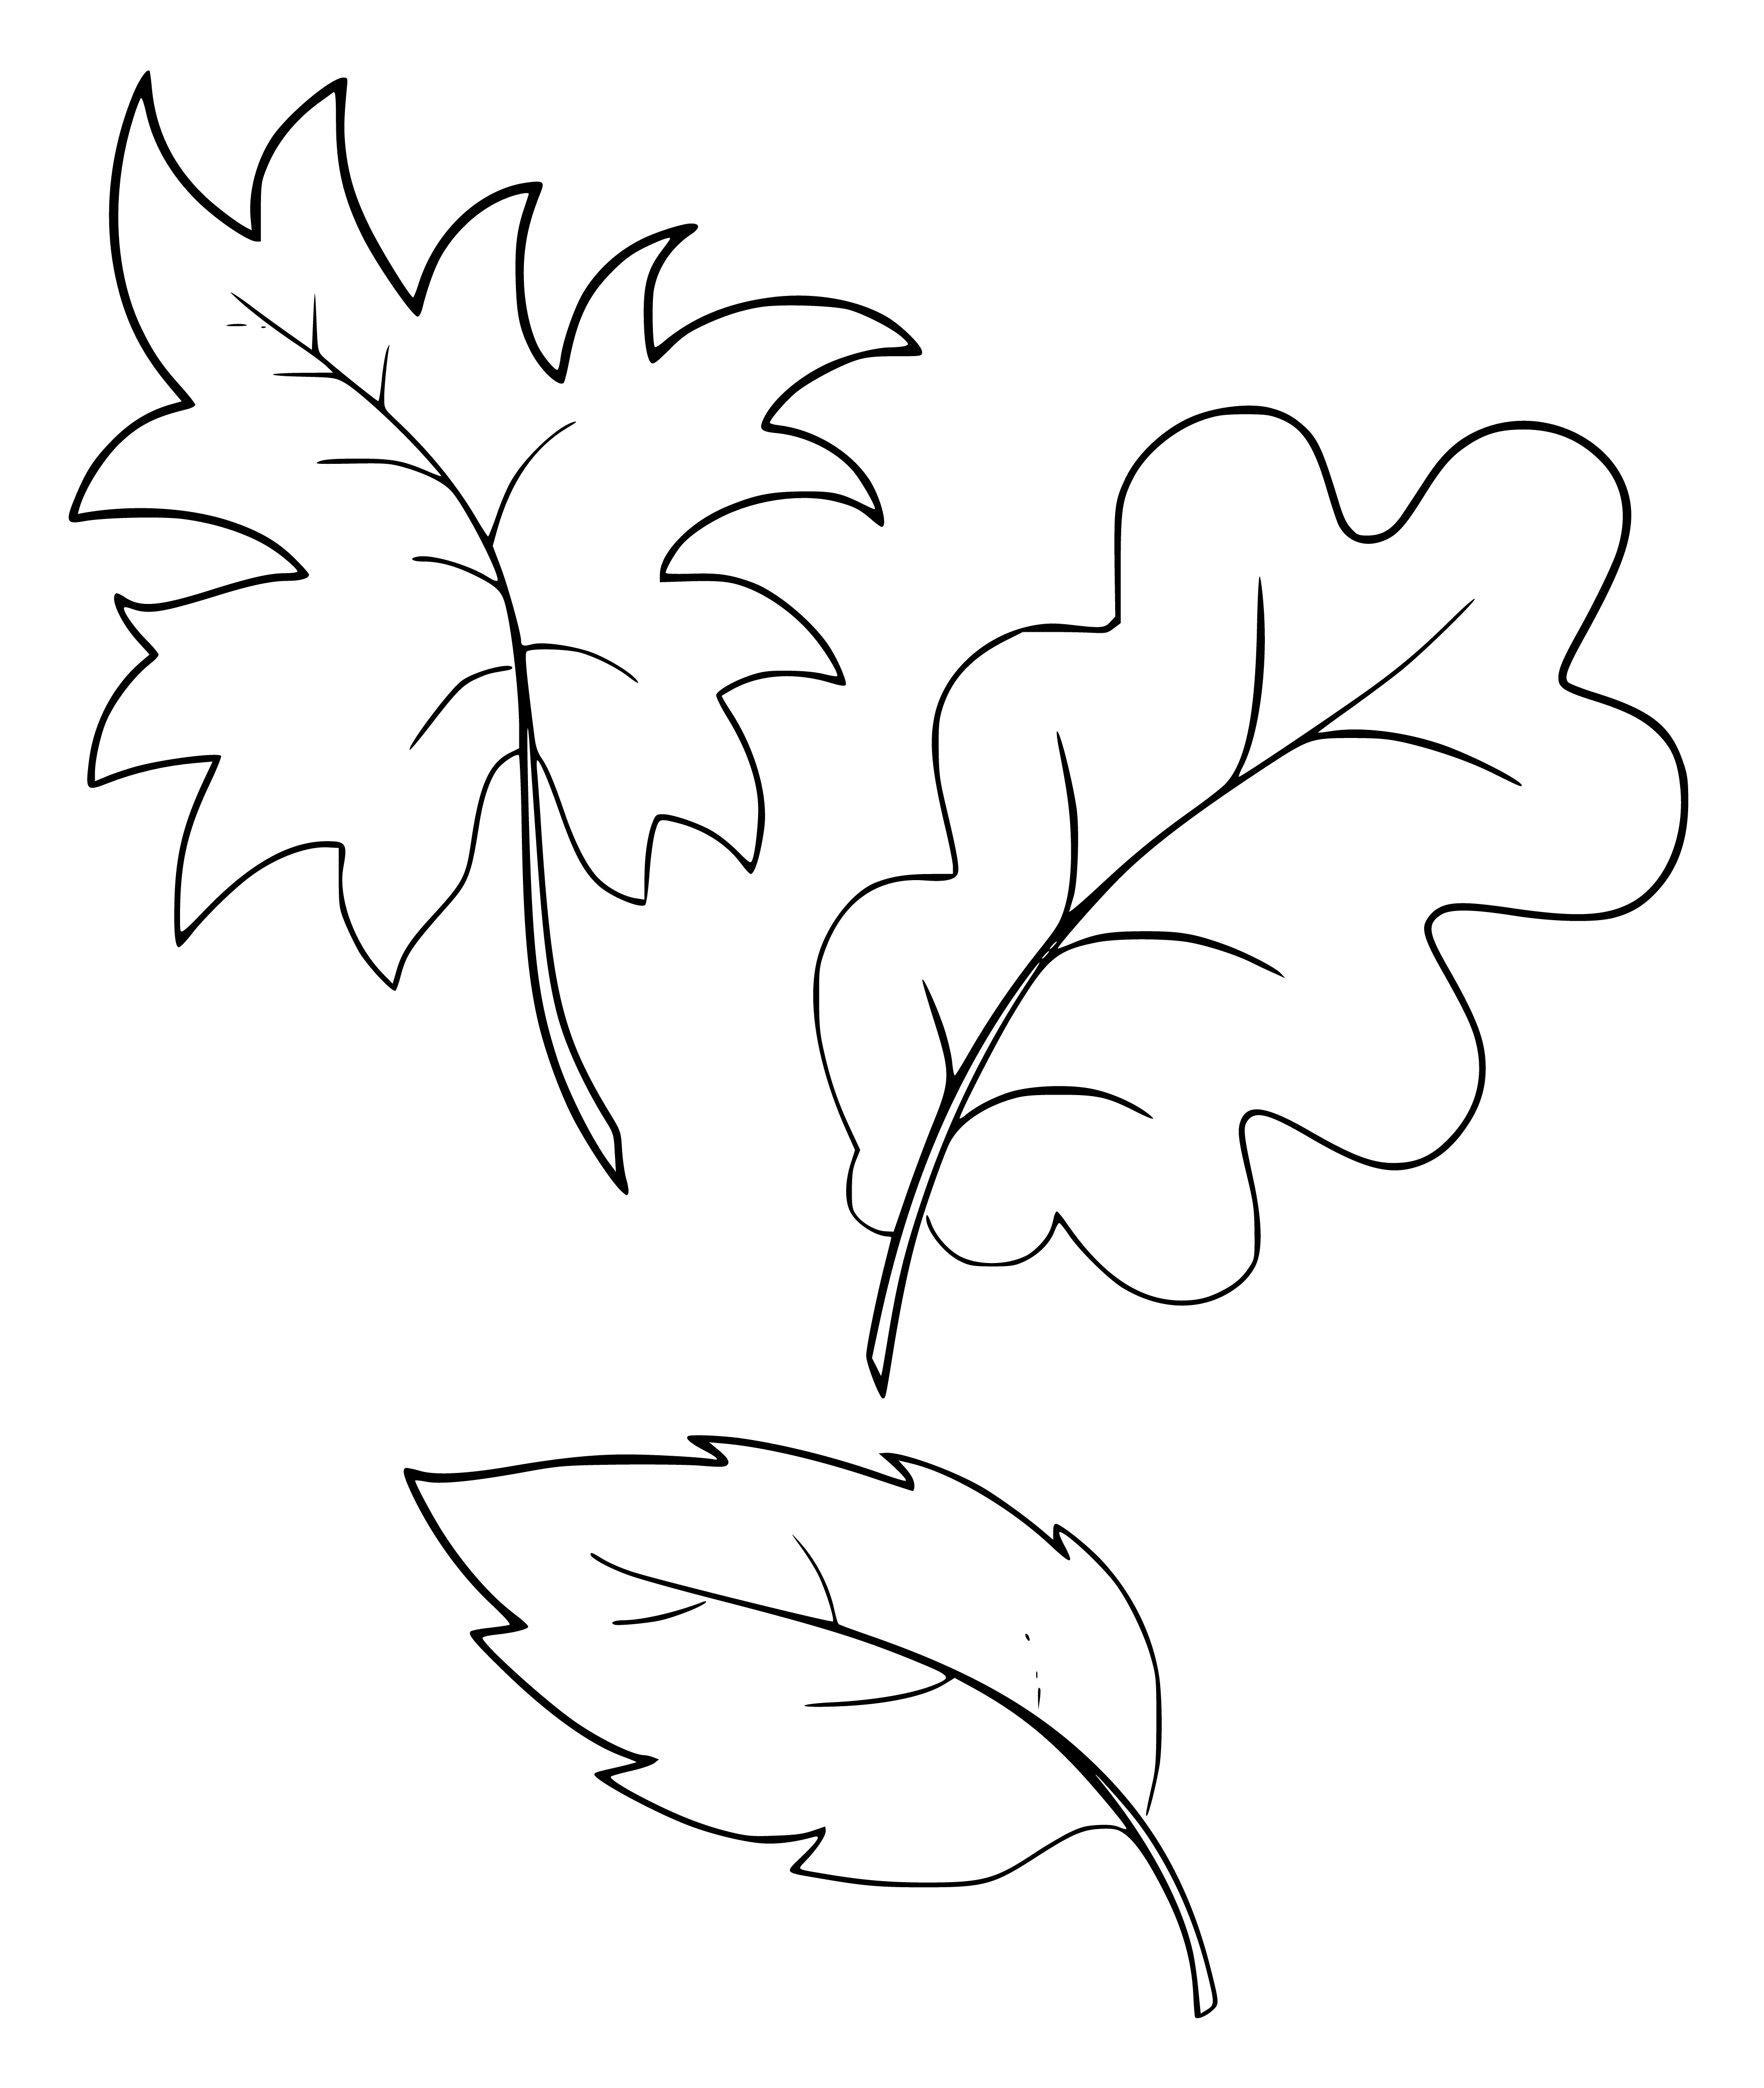 Different Types of Leaves Coloring Page Printable for Kids, Free, Simple and Easy, as PDF